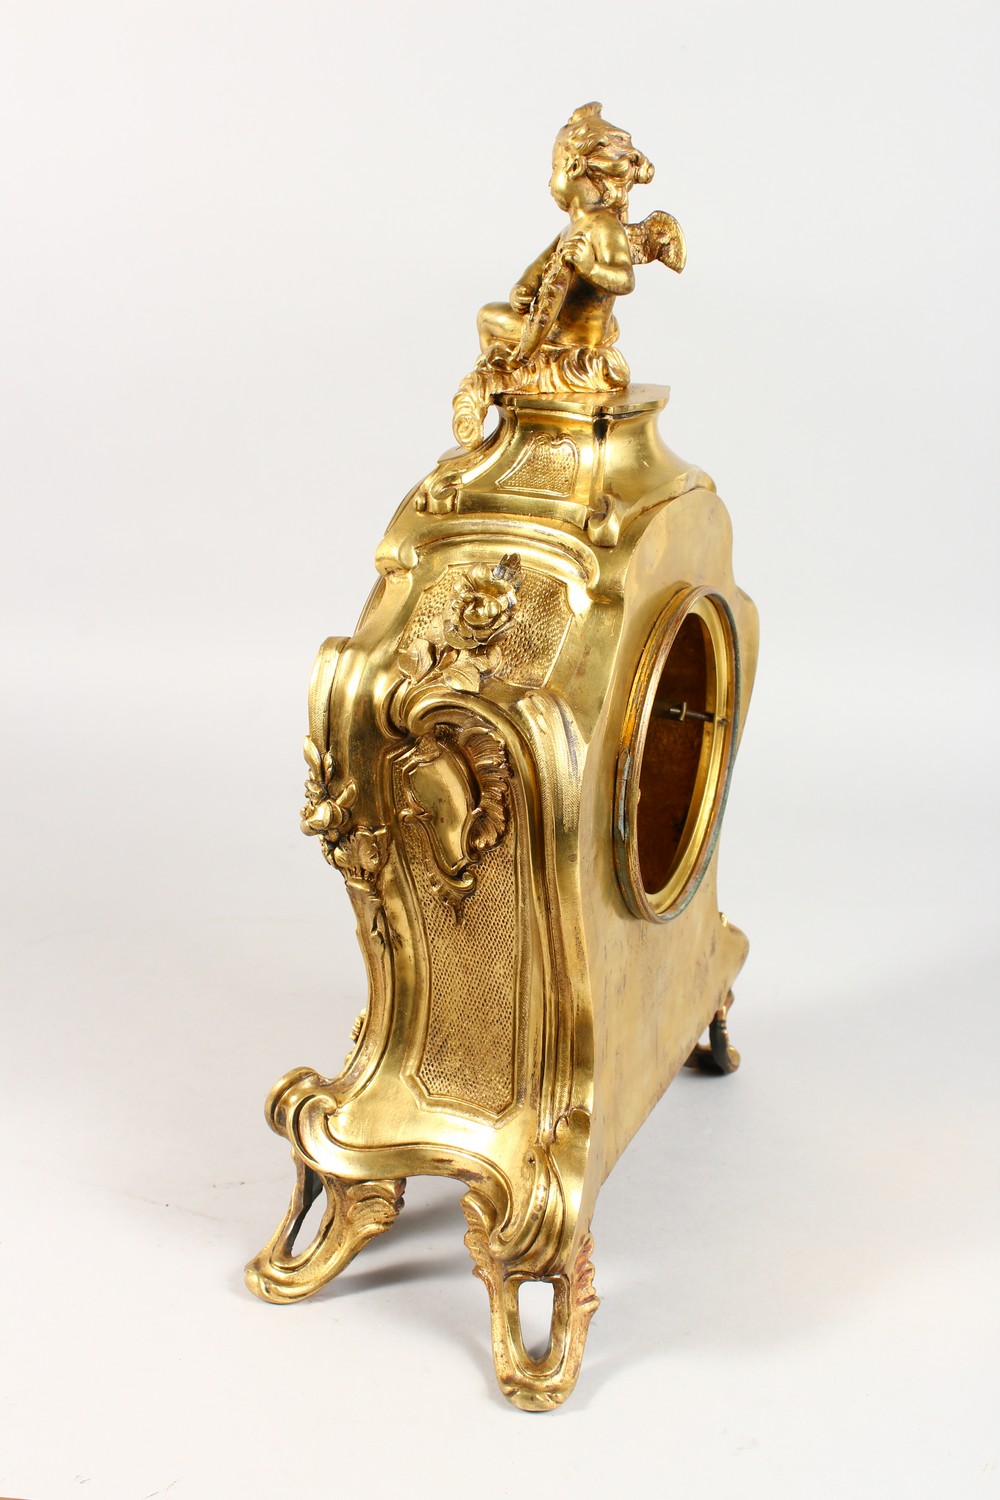 A GOOD LOUIS XVI HEAVY ORMOLU CLOCK by LEROUX, LE MANS, the case with cupids, scrolls, acanthus - Image 3 of 9